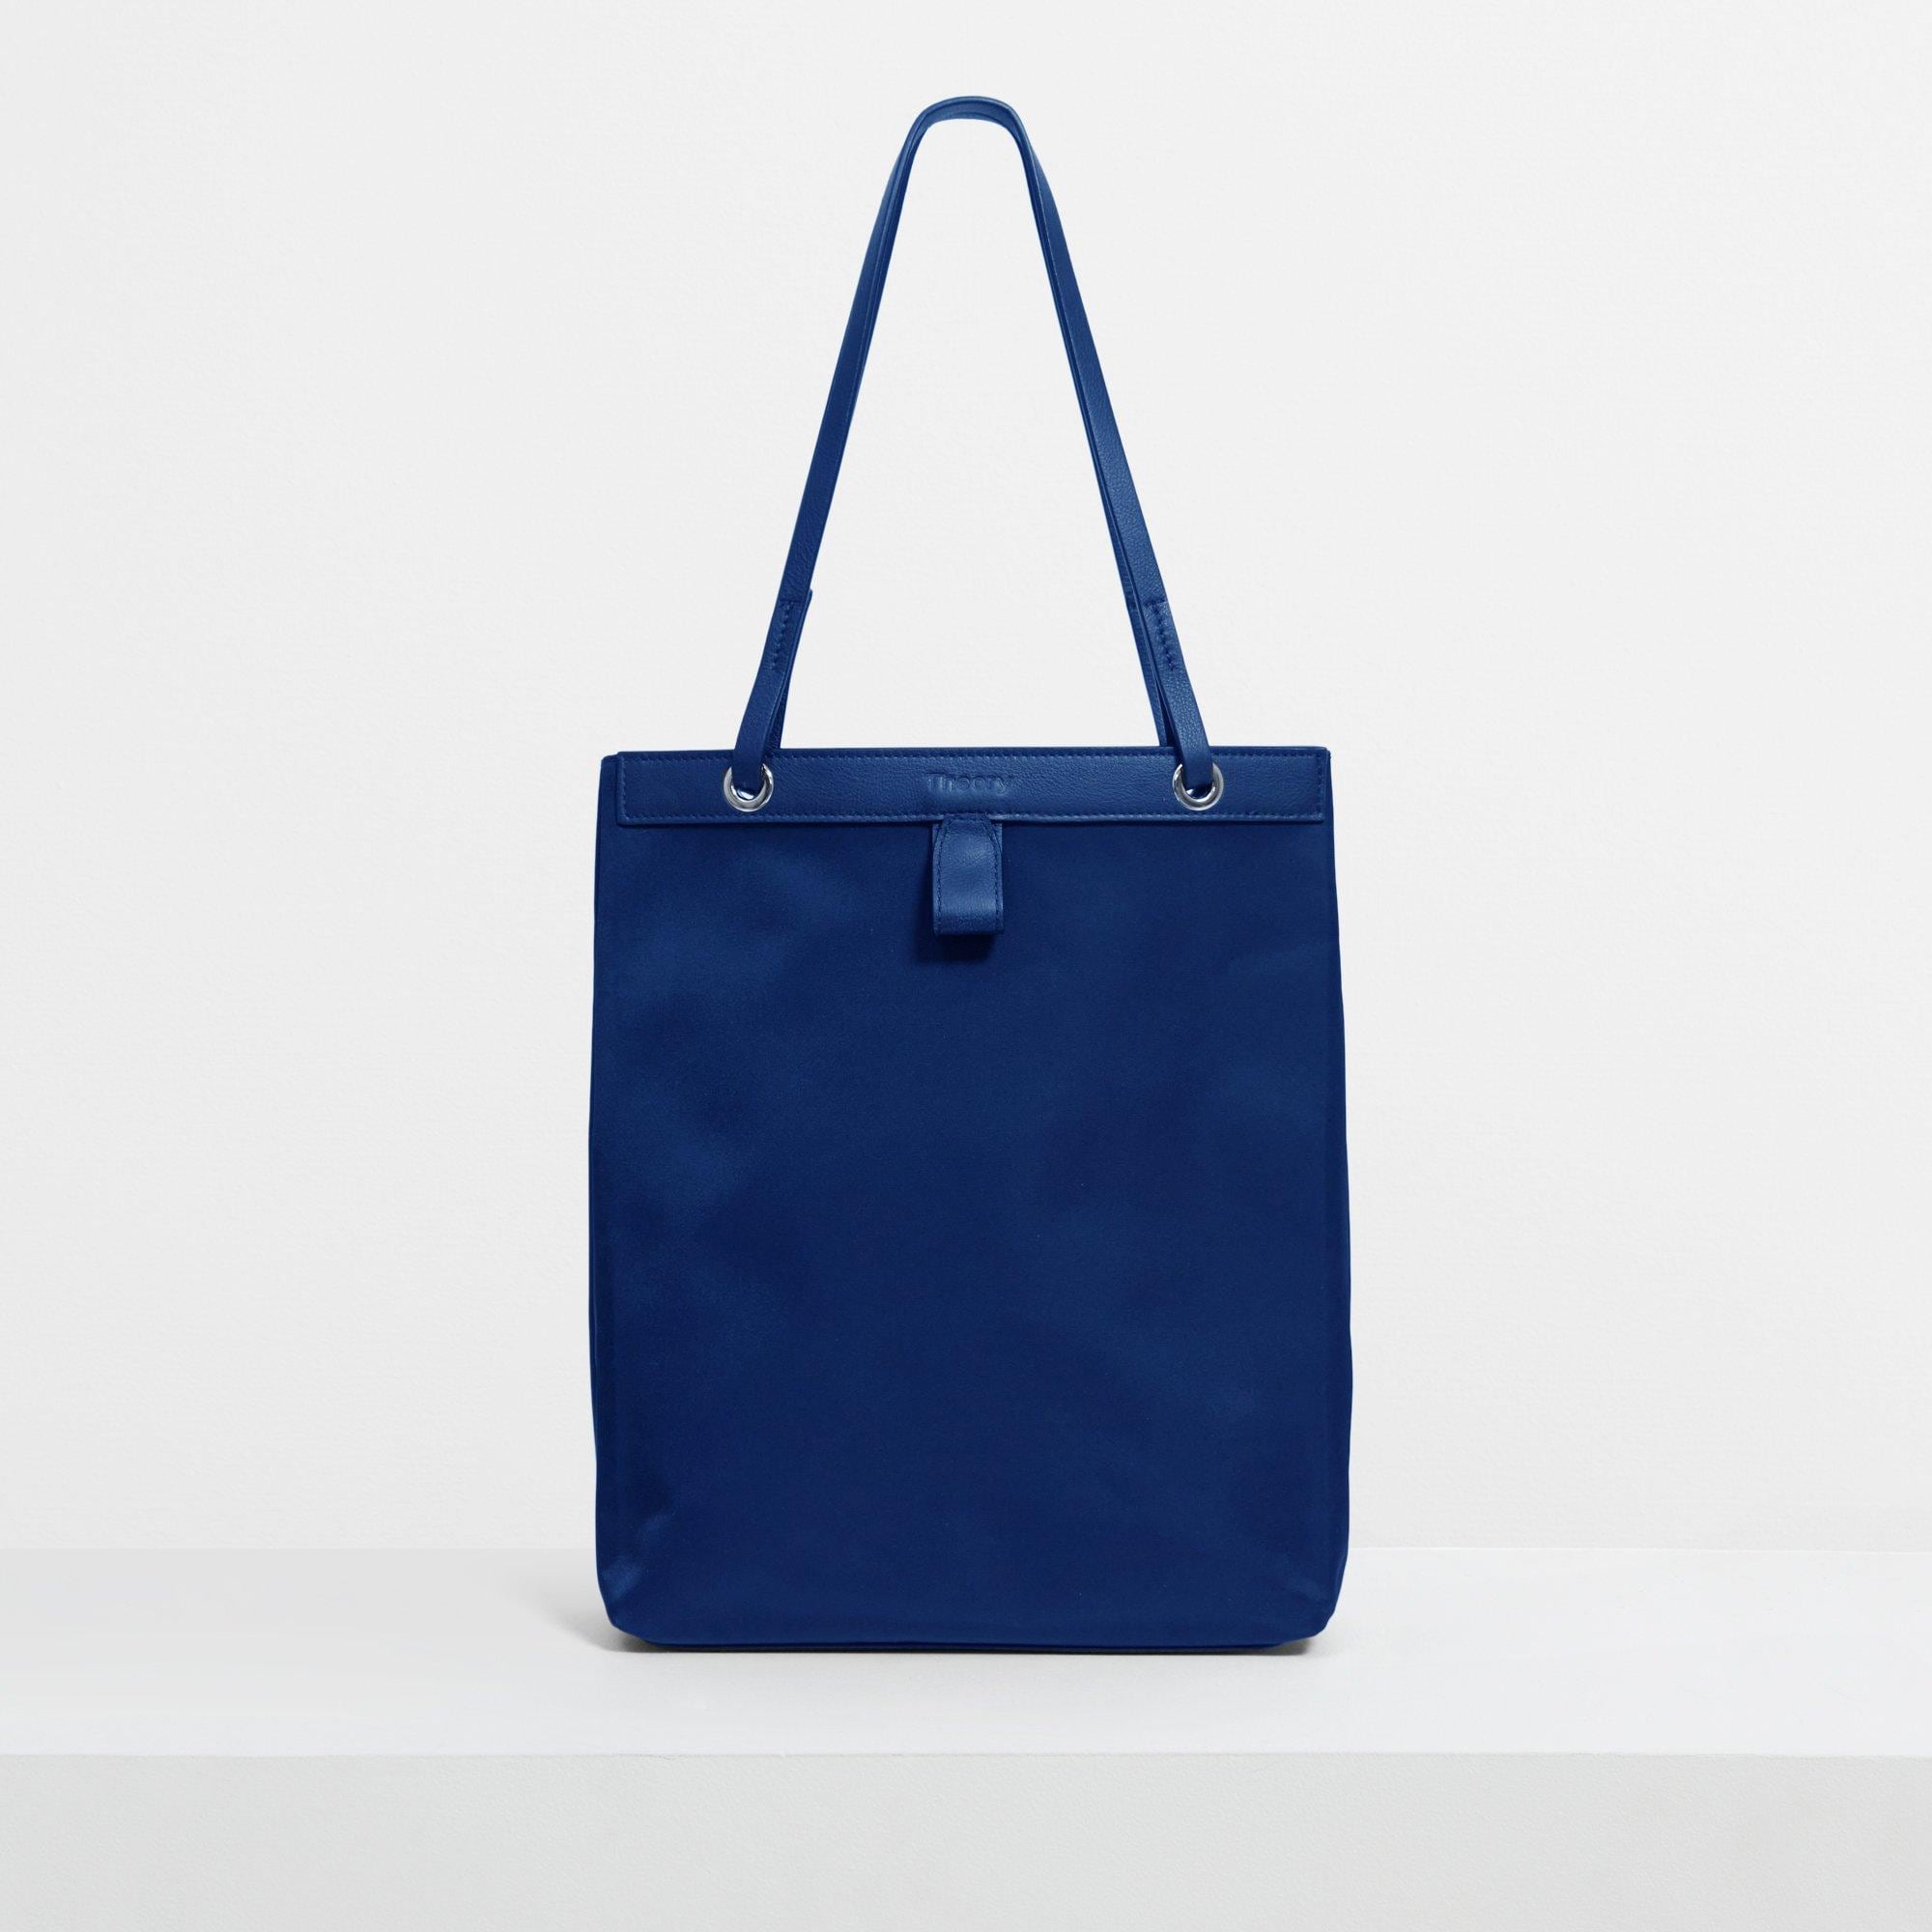 Theory Foldable Tote in Nylon